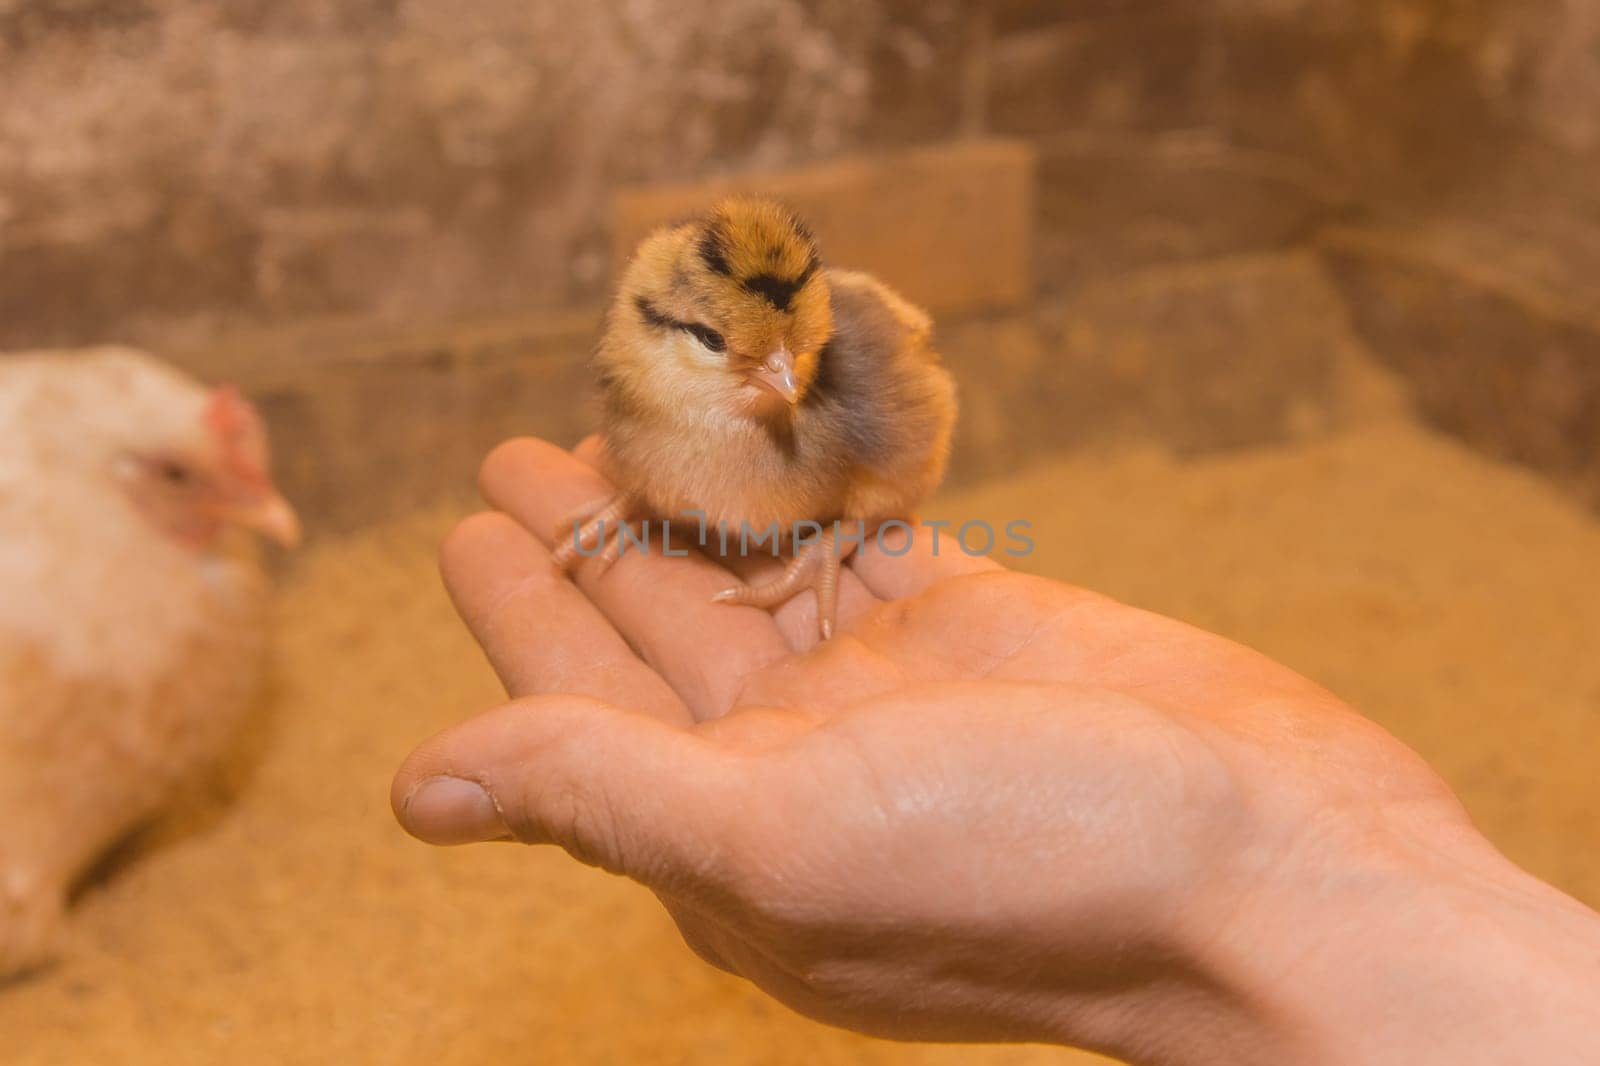 Small chick little cute fluffy chicken close-up in hand on background of barn.